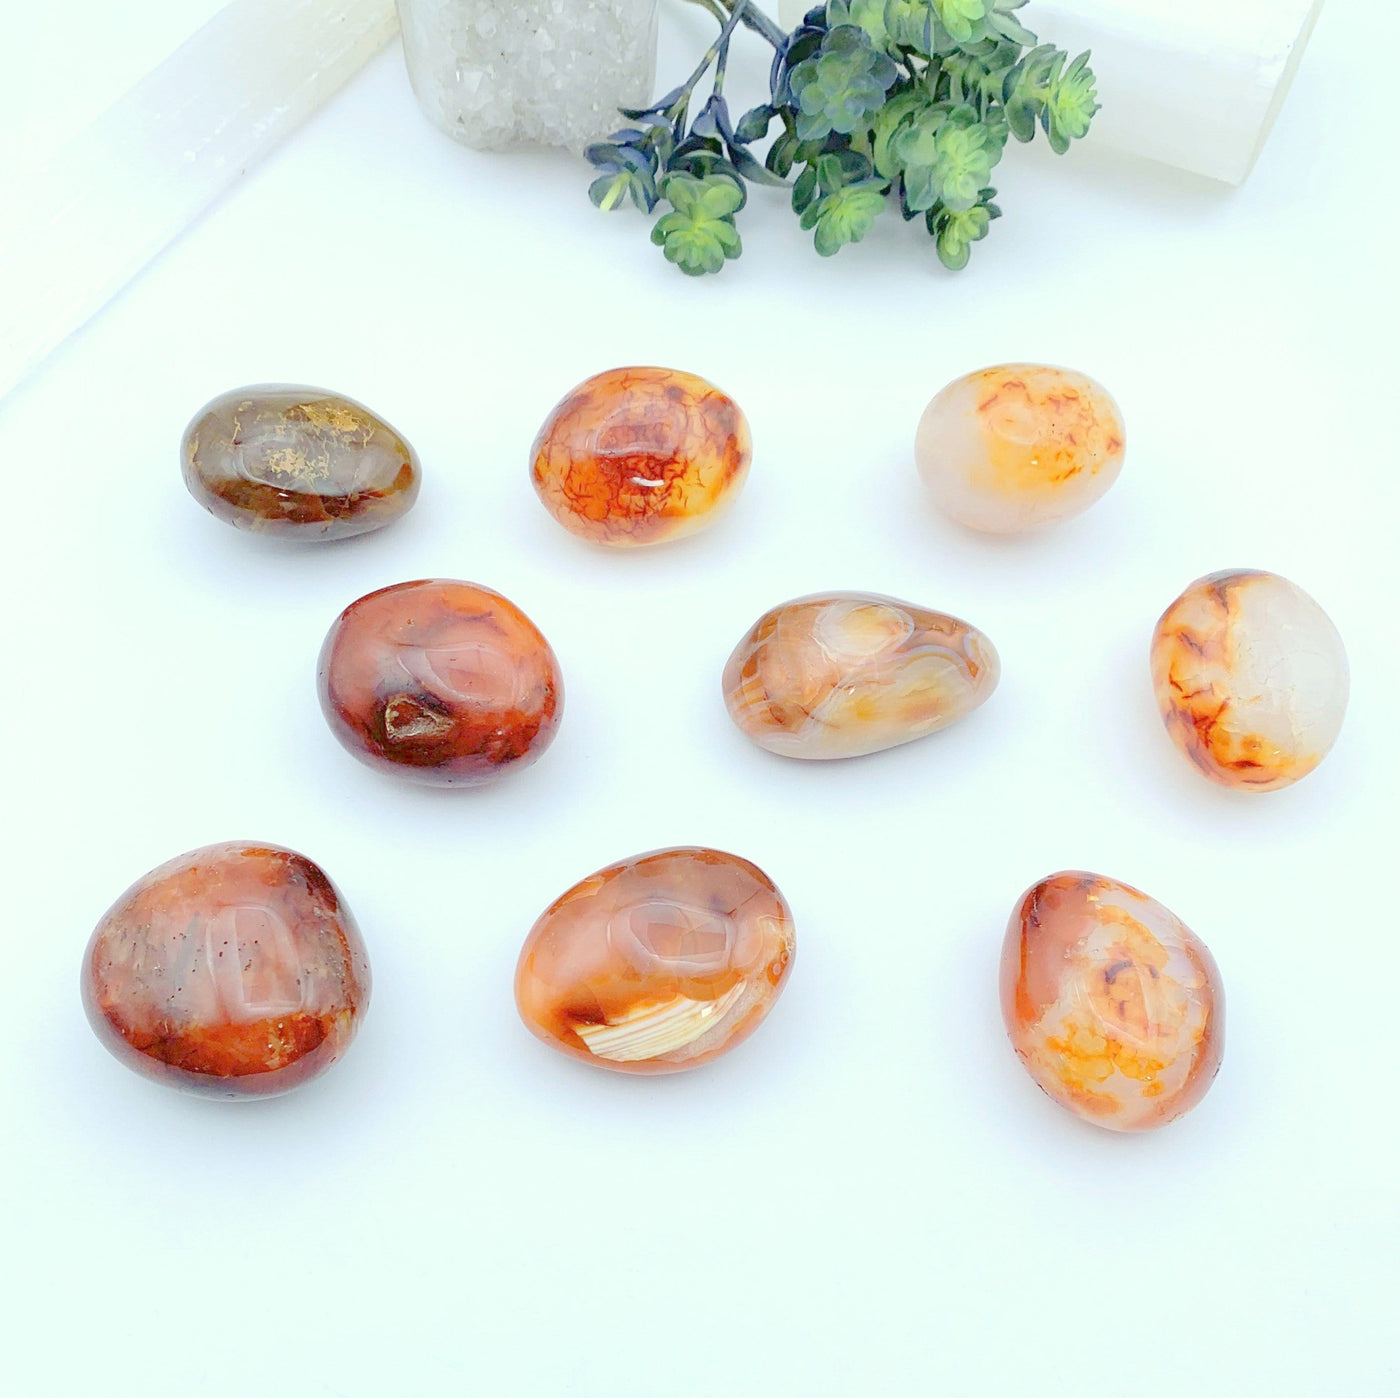 9 carnelian stones on a white background